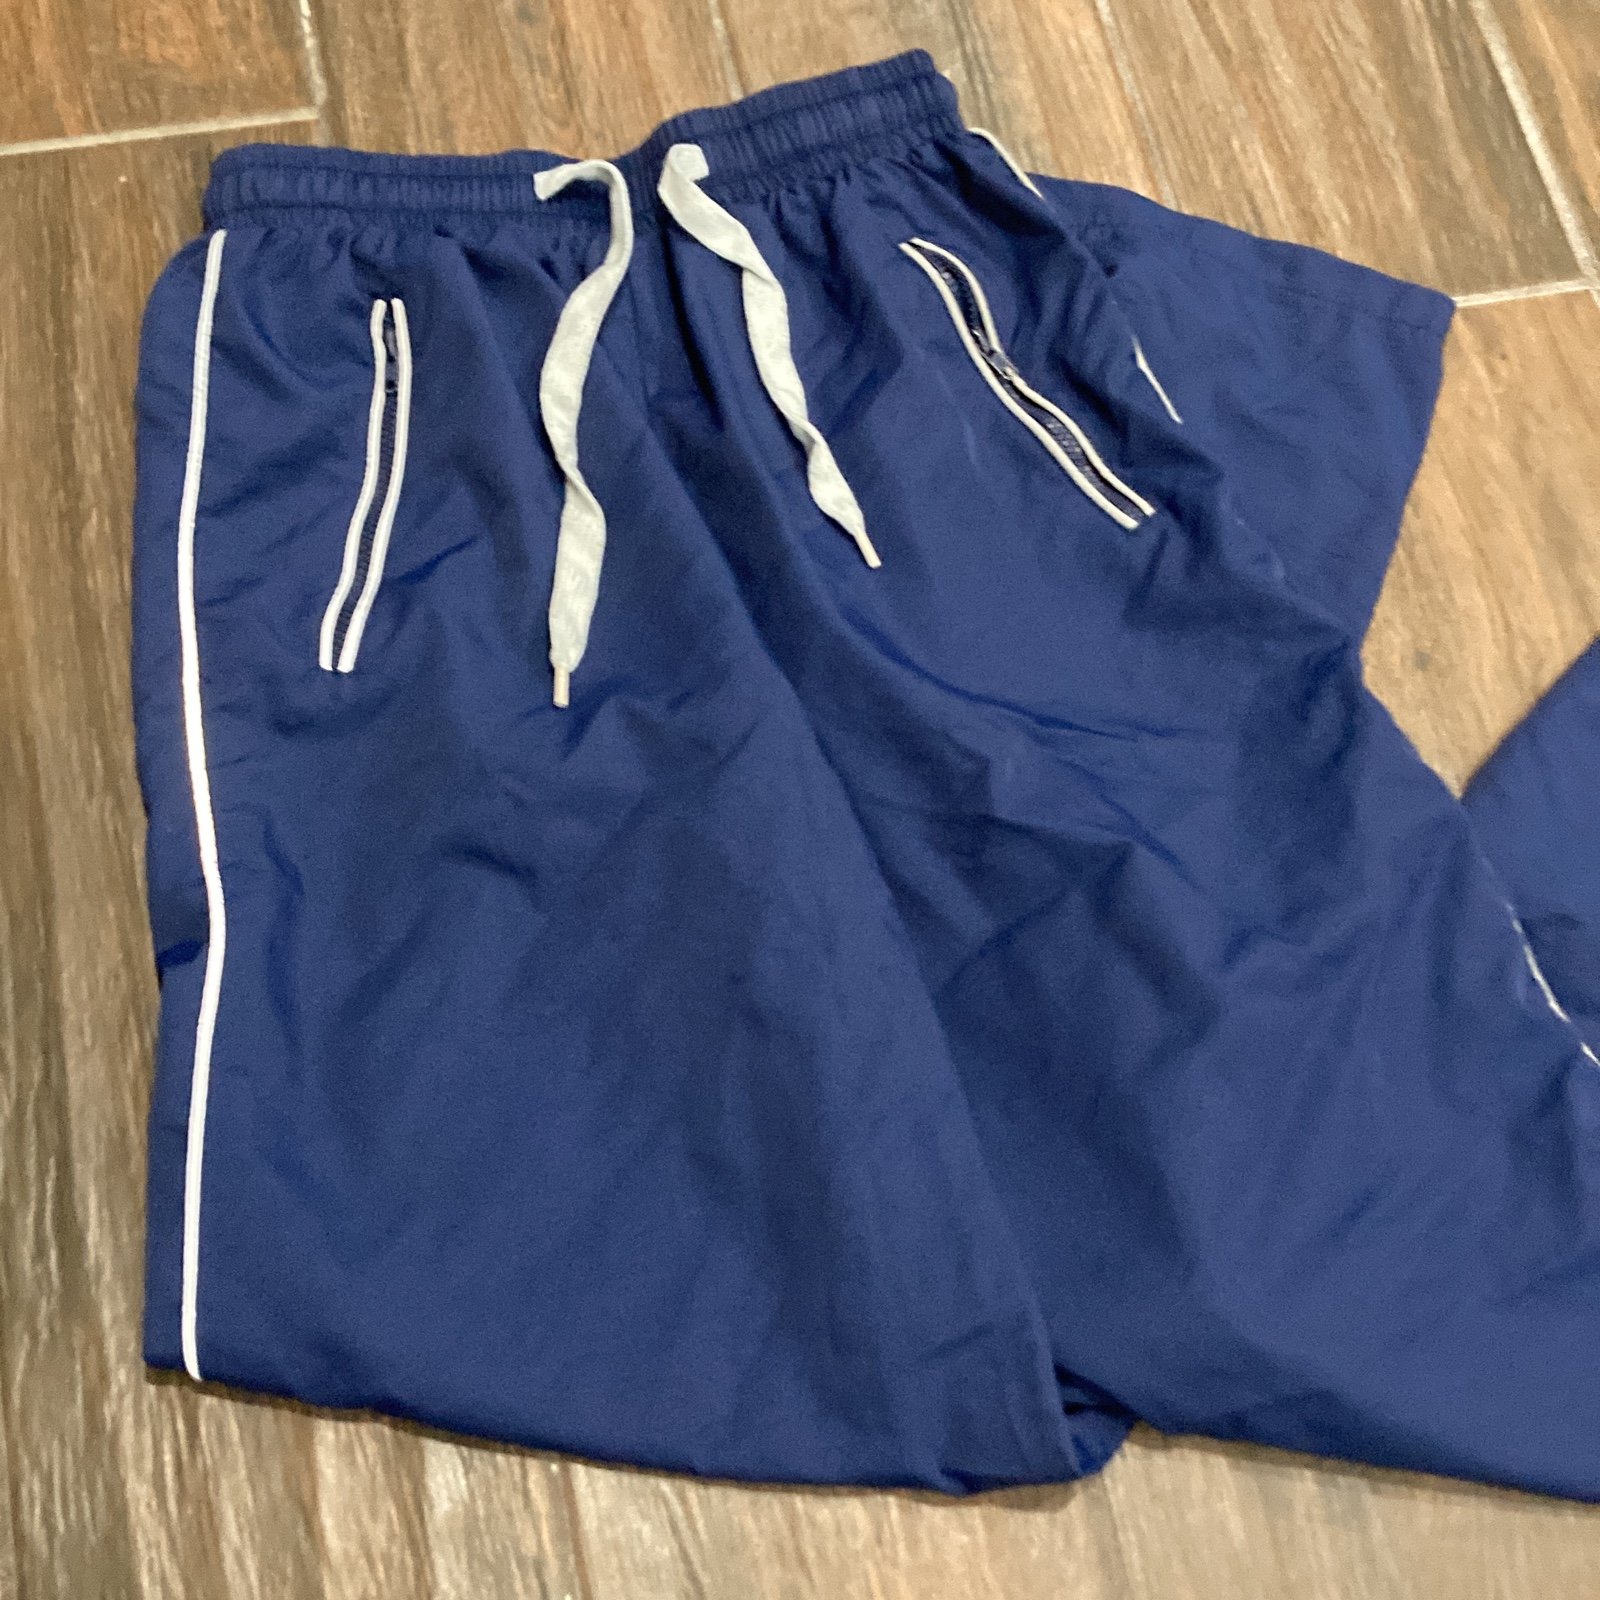 Great Baggy Blue String Pants With Pockets hxAp7f614 al